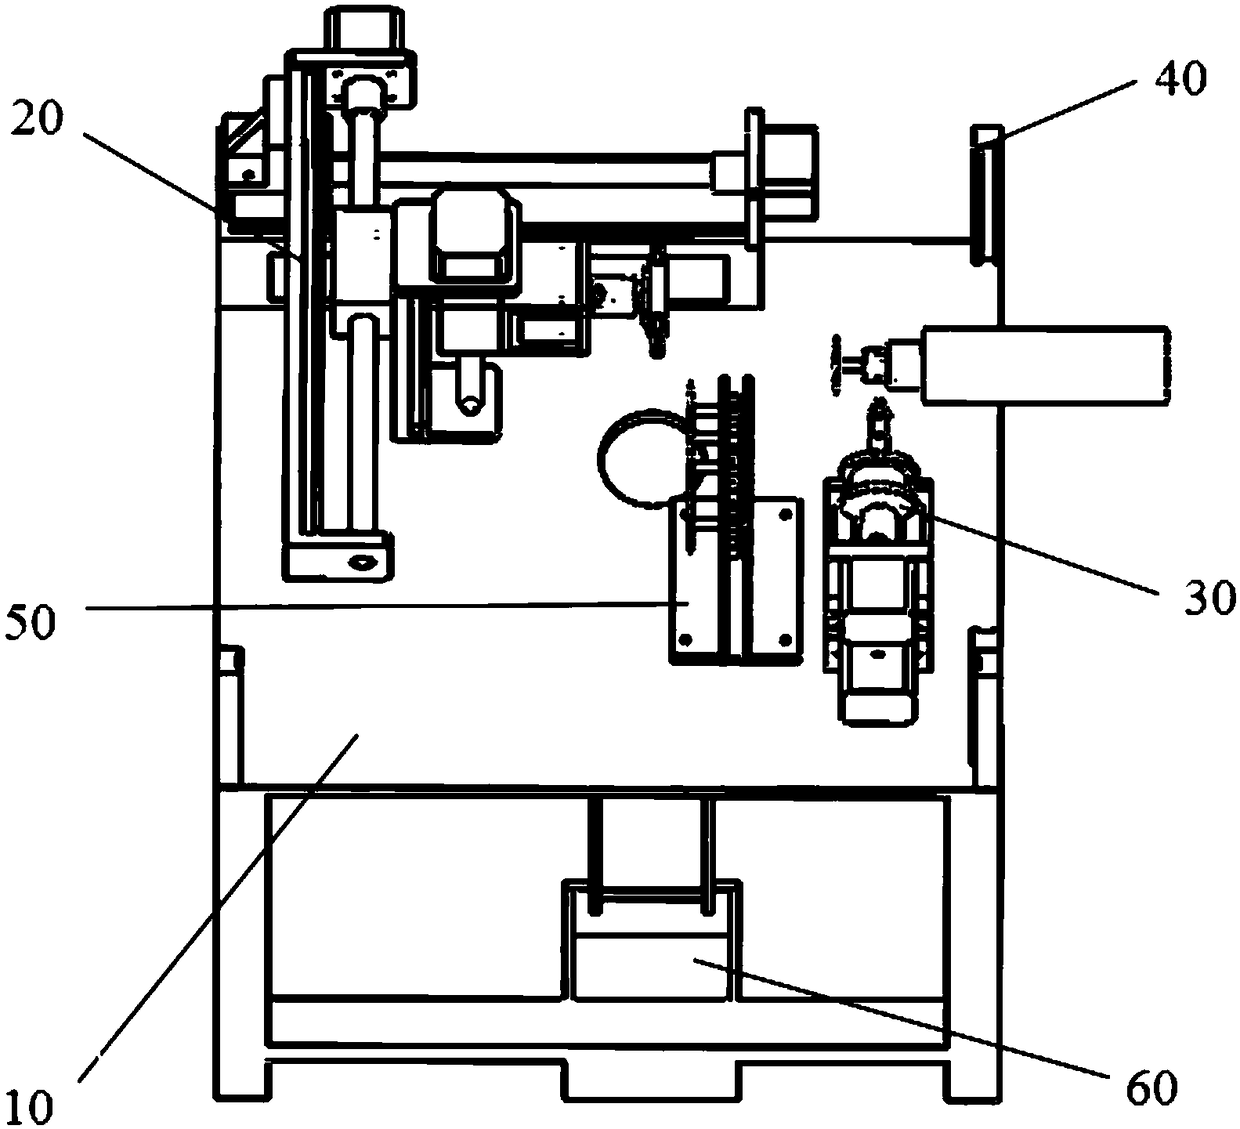 An automatic grinding head replacement device